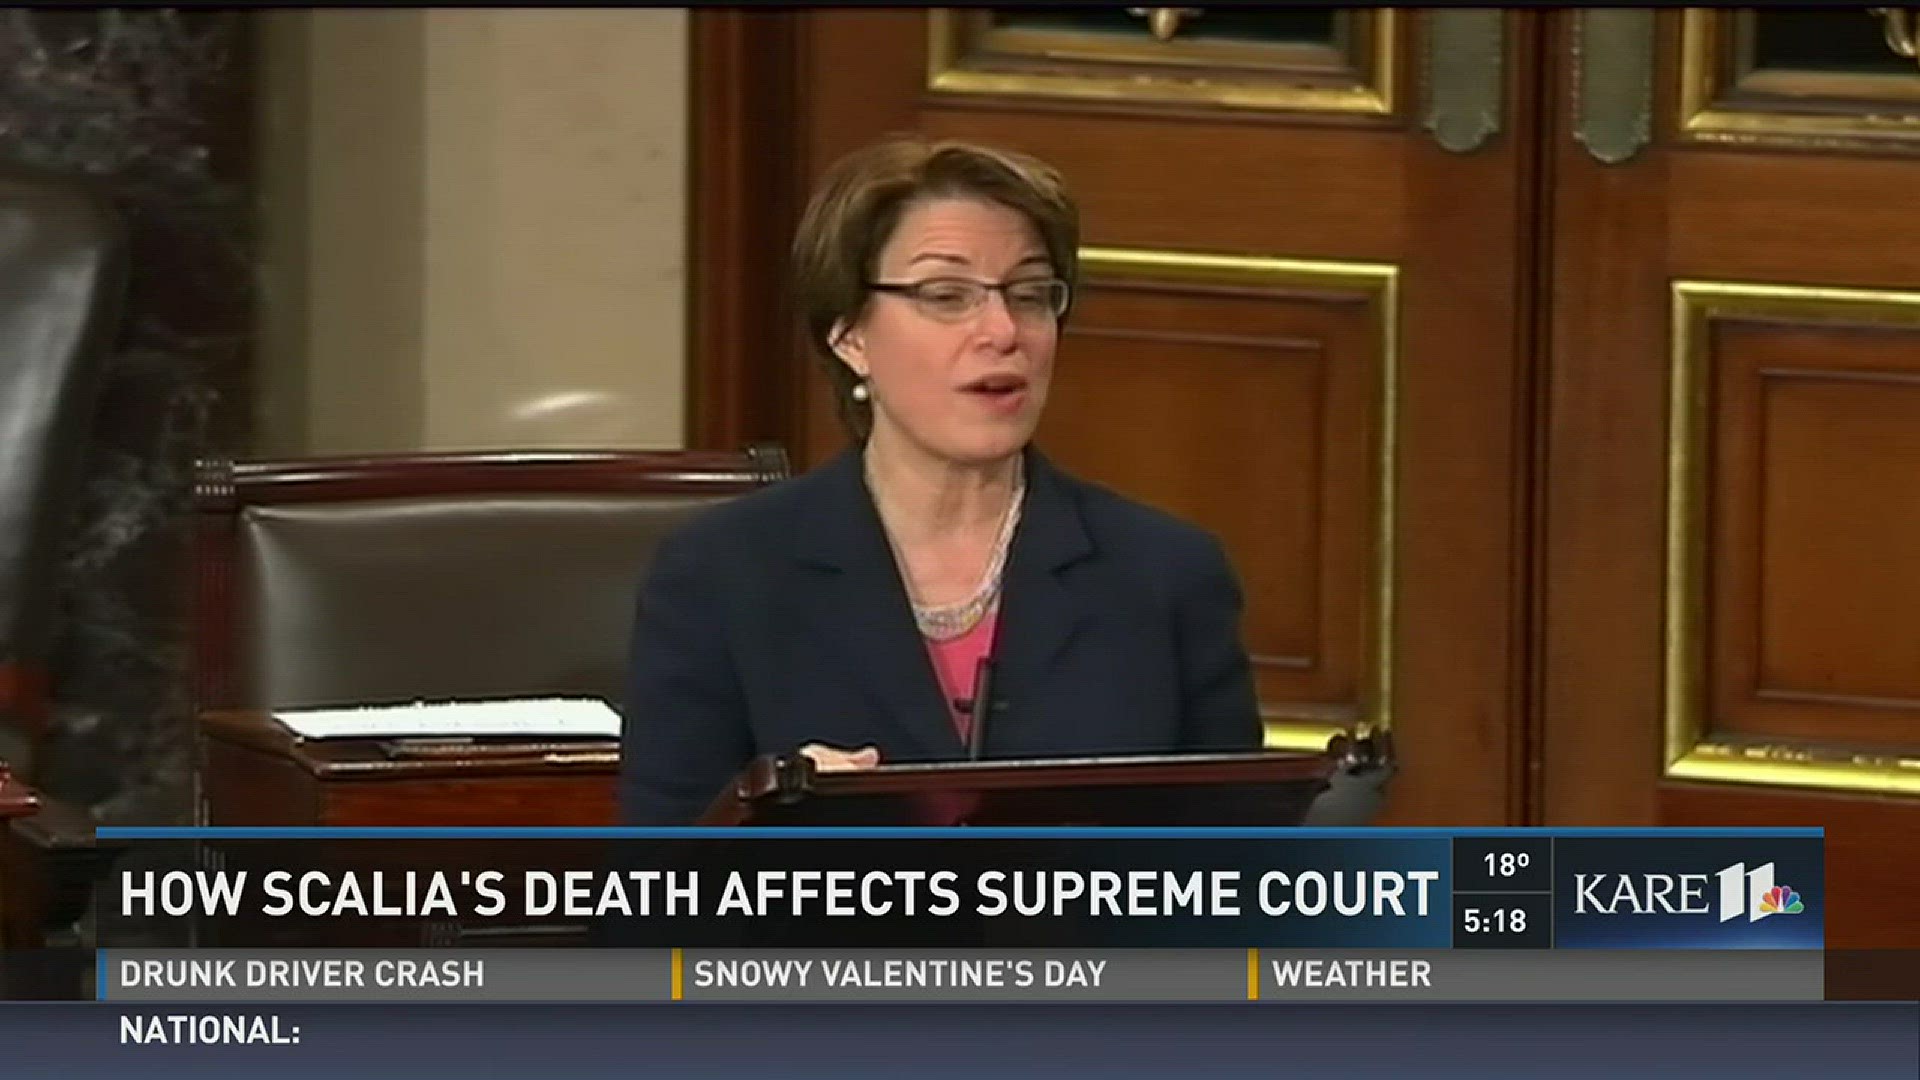 How Scalia's Death Affects the Supreme Court